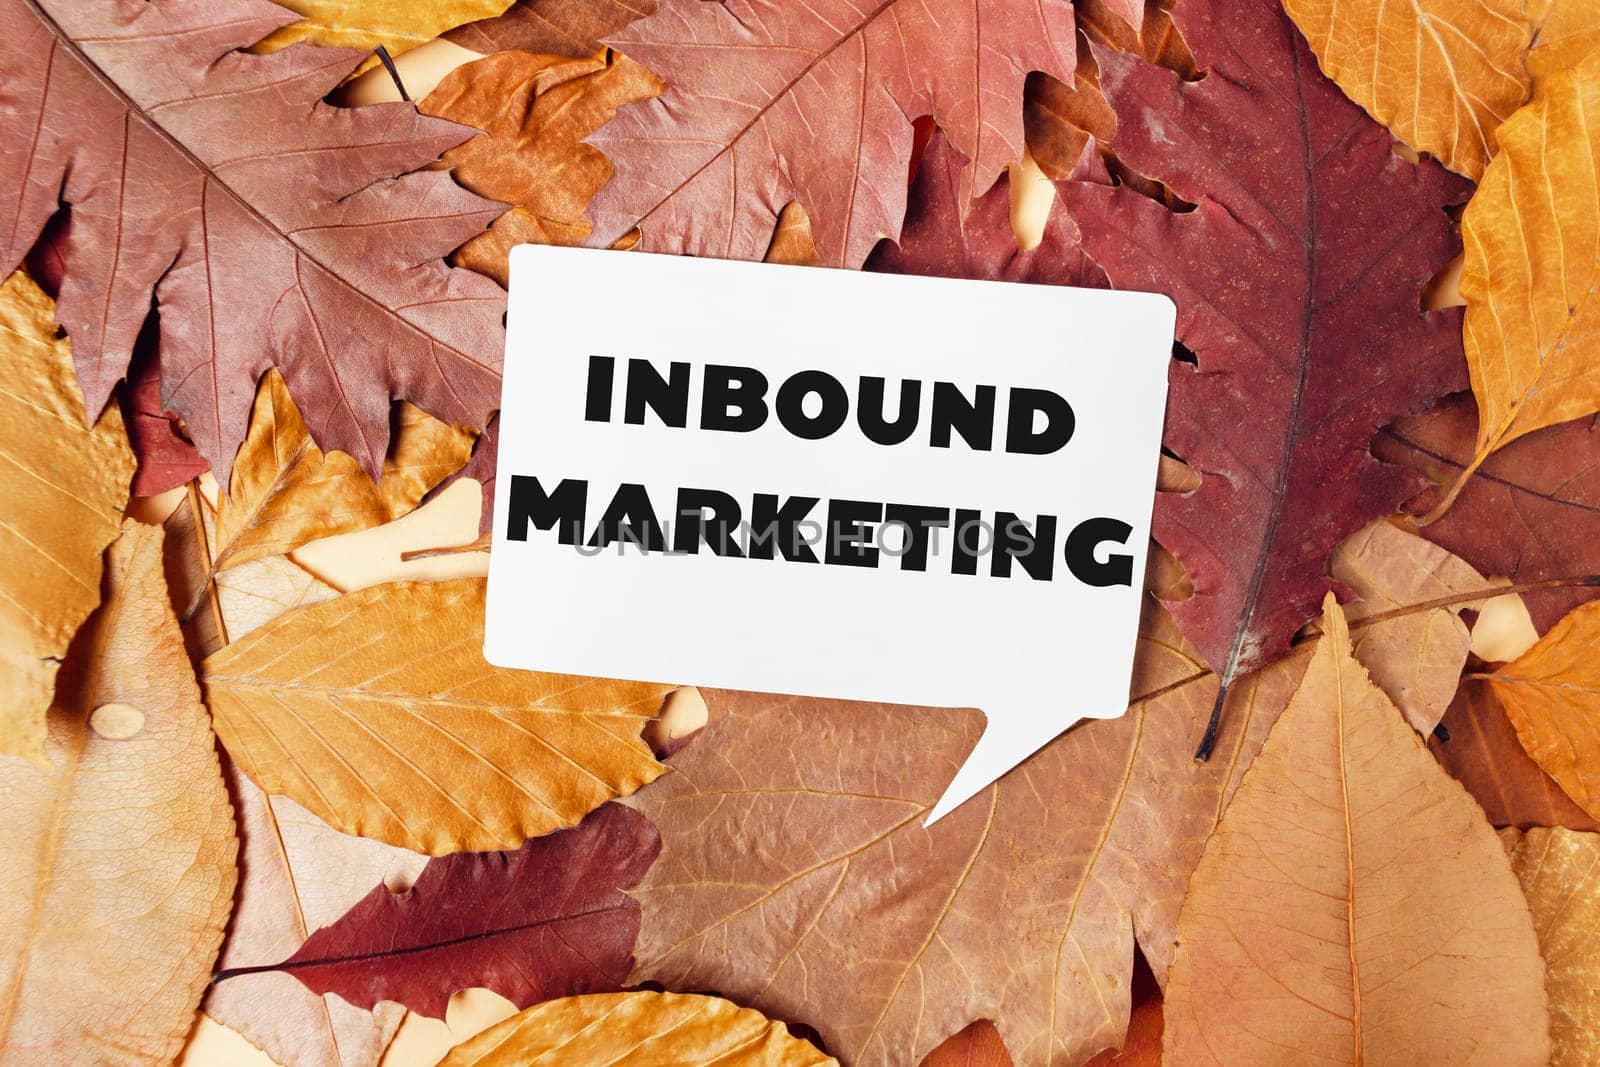 A white sign with the word Inbound Marketing written on it is placed on top of a pile of autumn leaves